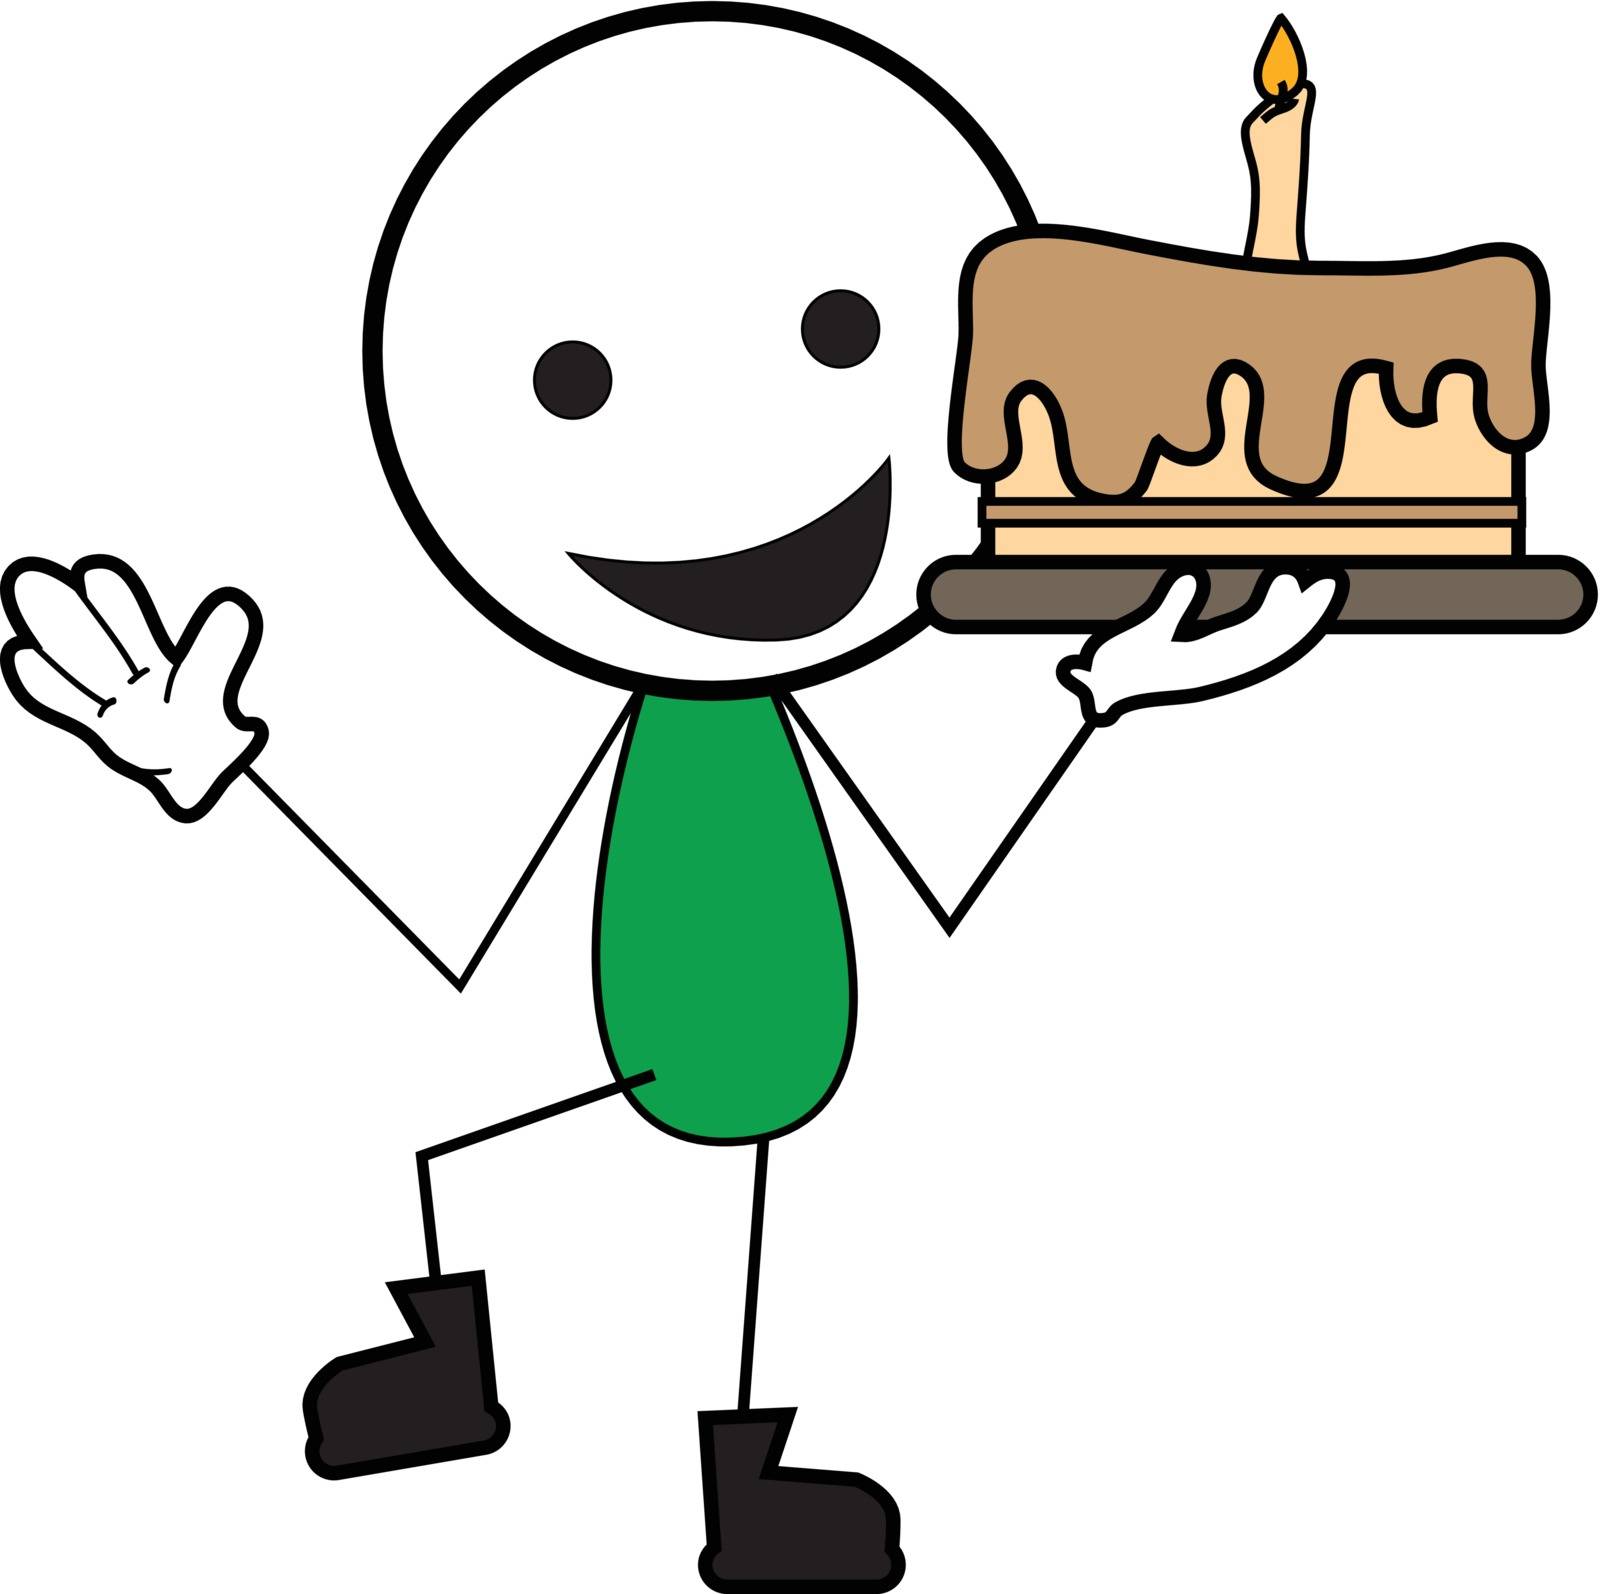 stick figure with cake and a burning candle